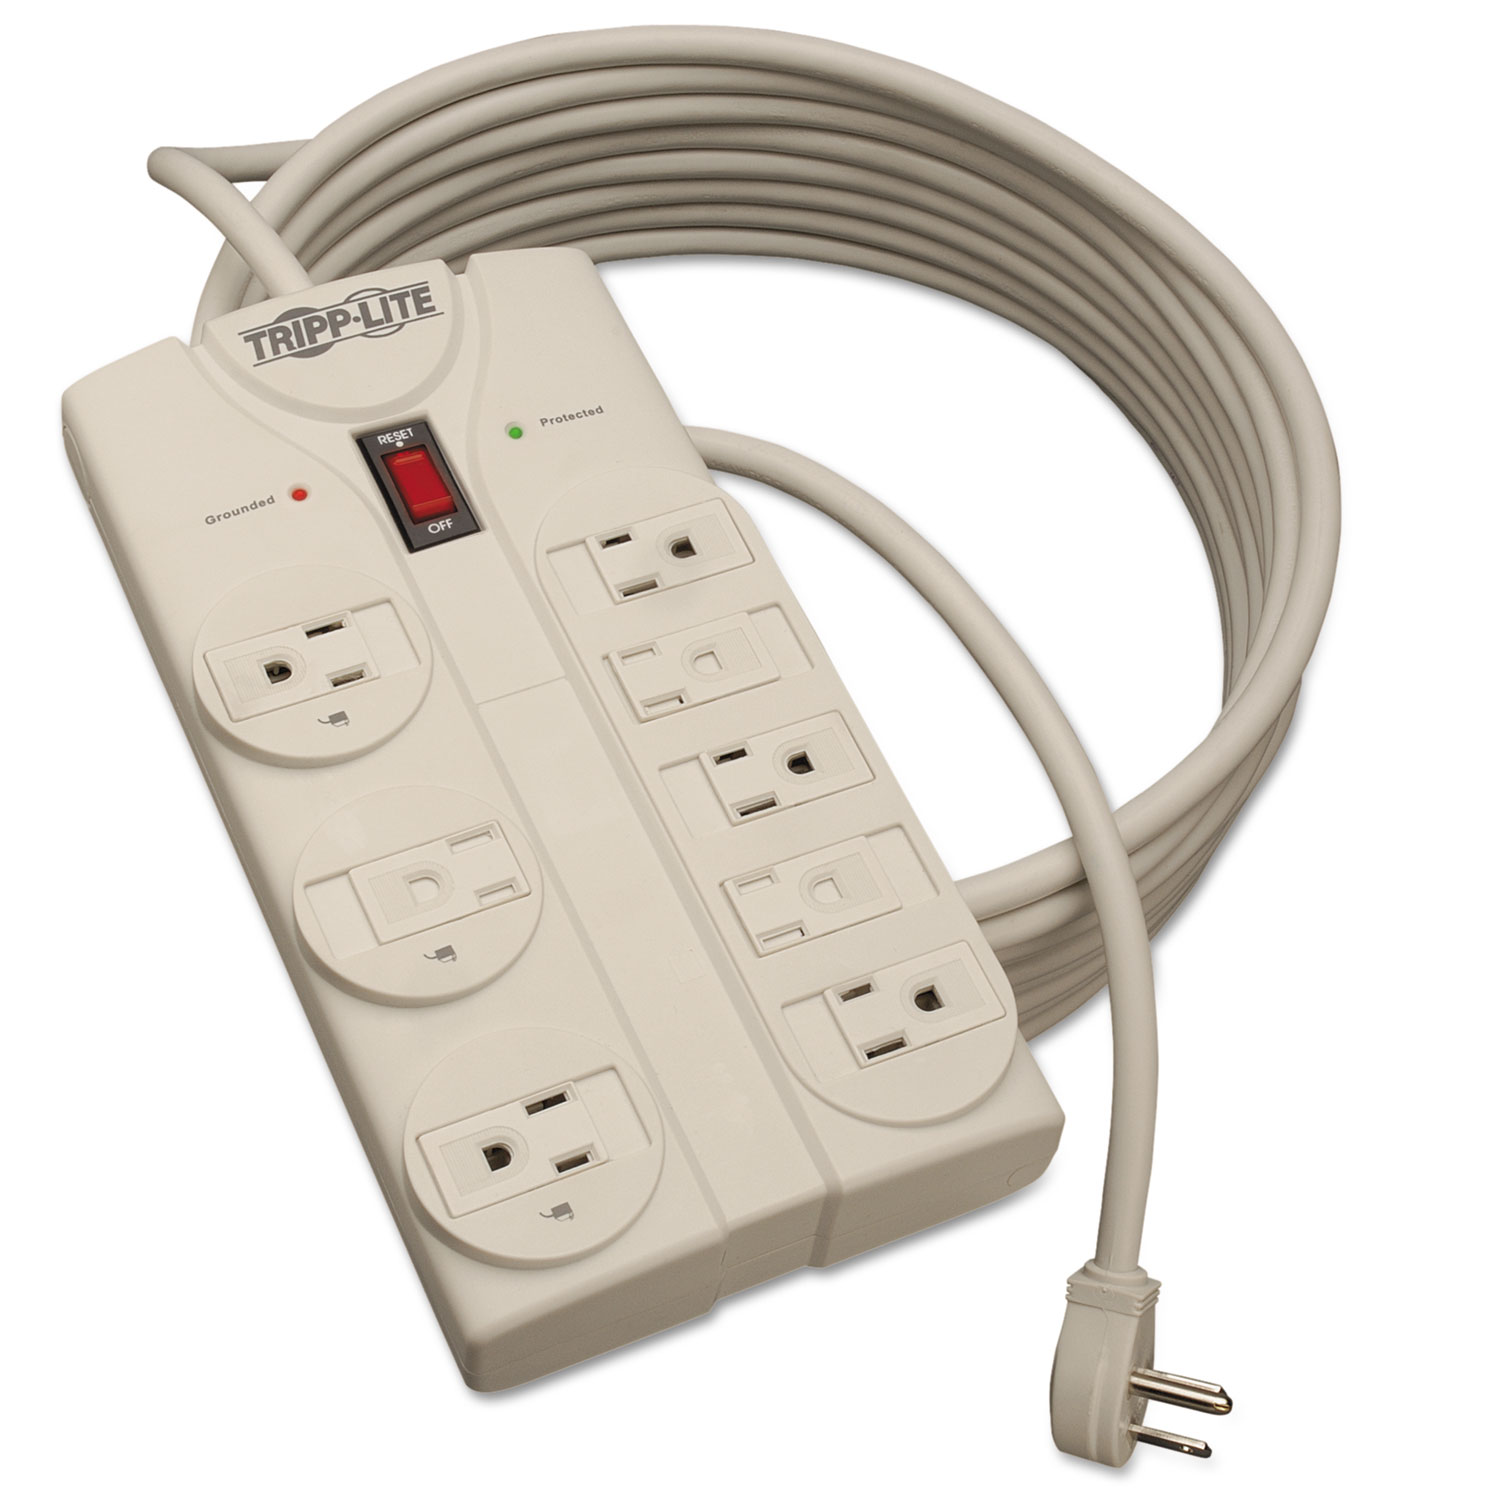  Tripp Lite TLP825 Protect It! Surge Protector, 8 Outlets, 25 ft. Cord, 1440 Joules, Light Gray (TRPTLP825) 